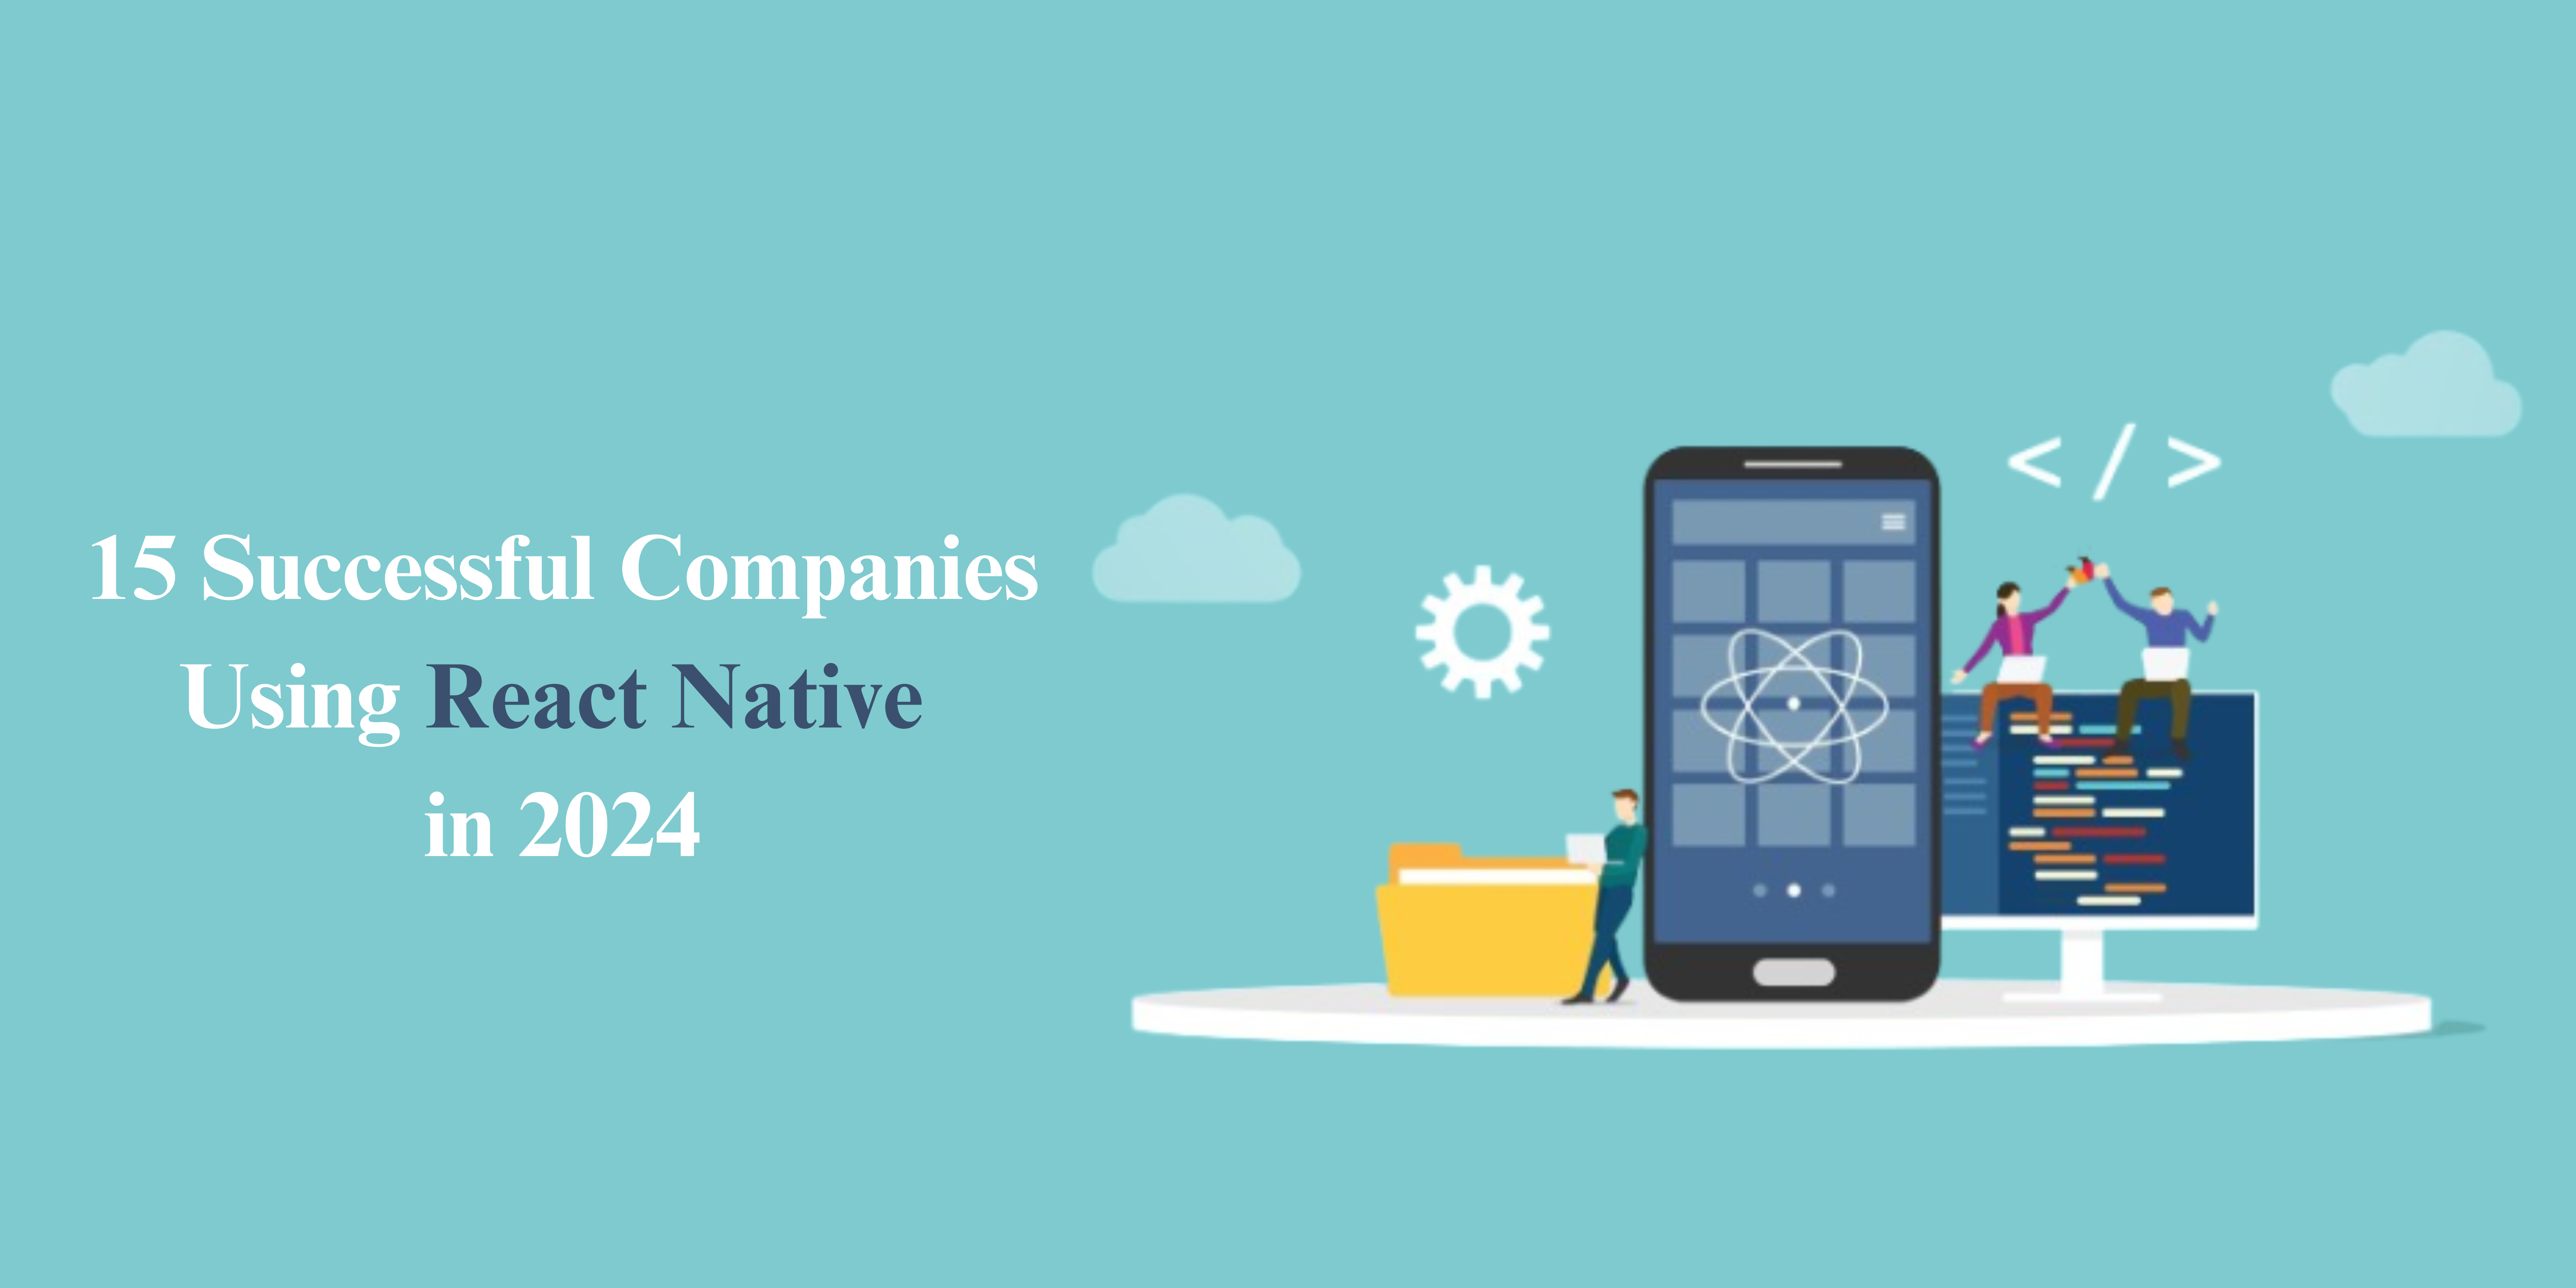 15 Successful Companies Using React Native in 2024